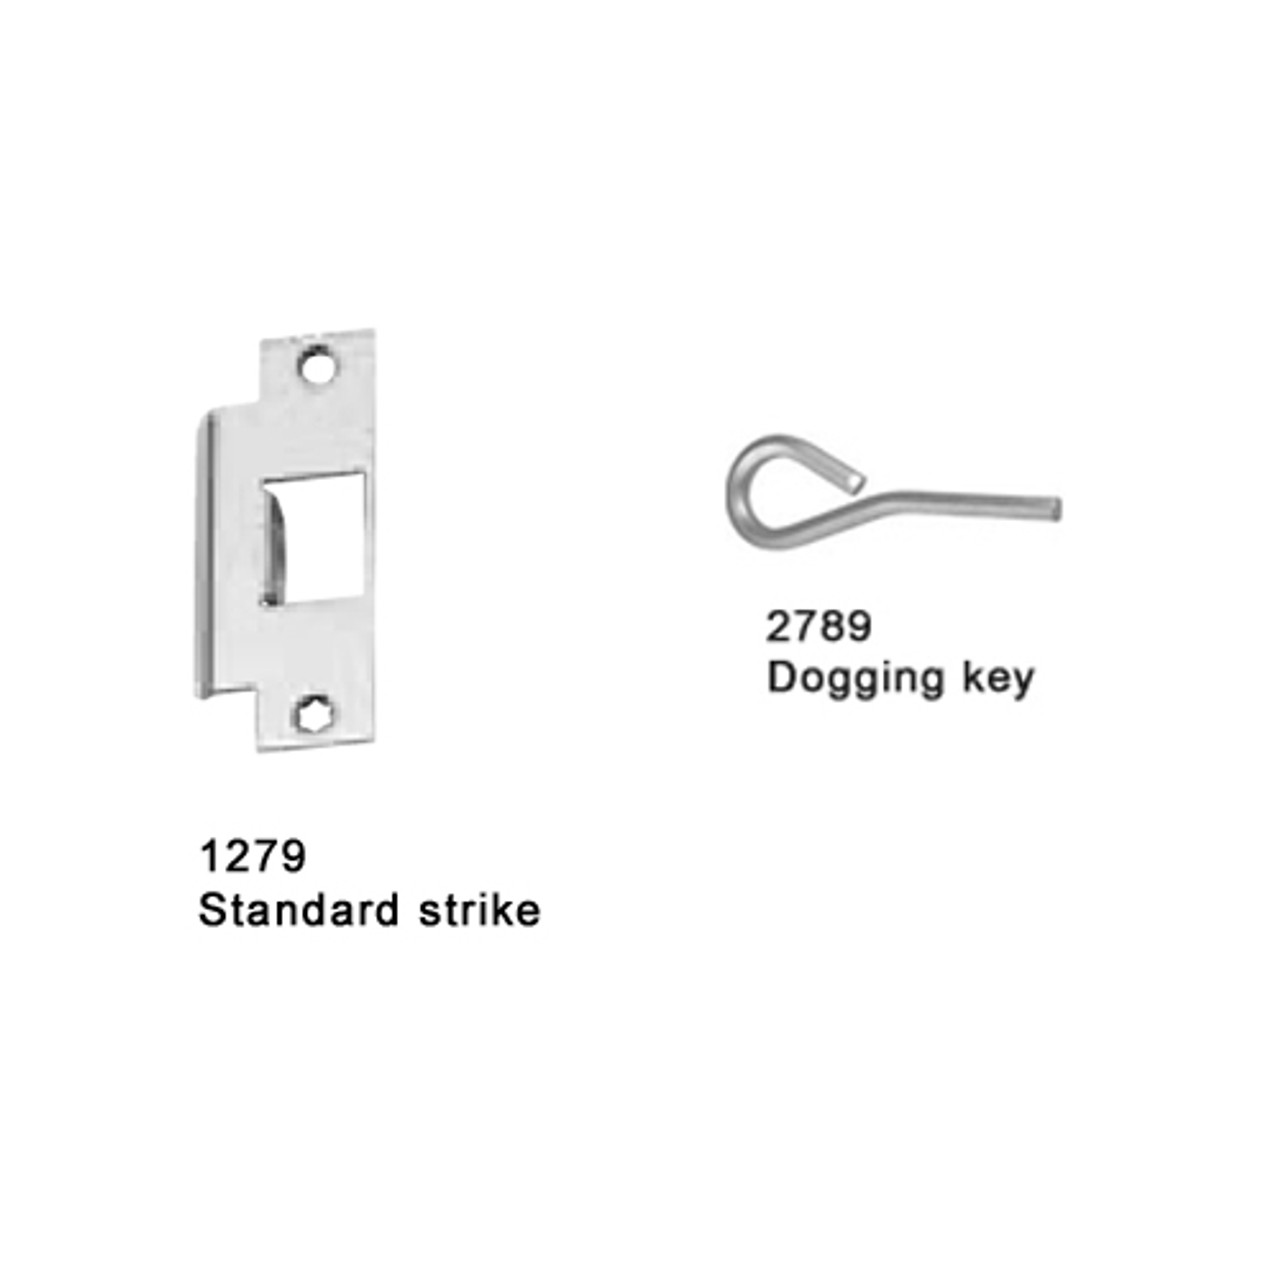 25-M-L-DT-DANE-US26-3-LHR Falcon 25 Series Mortise Lock Devices 510L-DT Dane Lever Trim with Dummy Trim in Polished Chrome